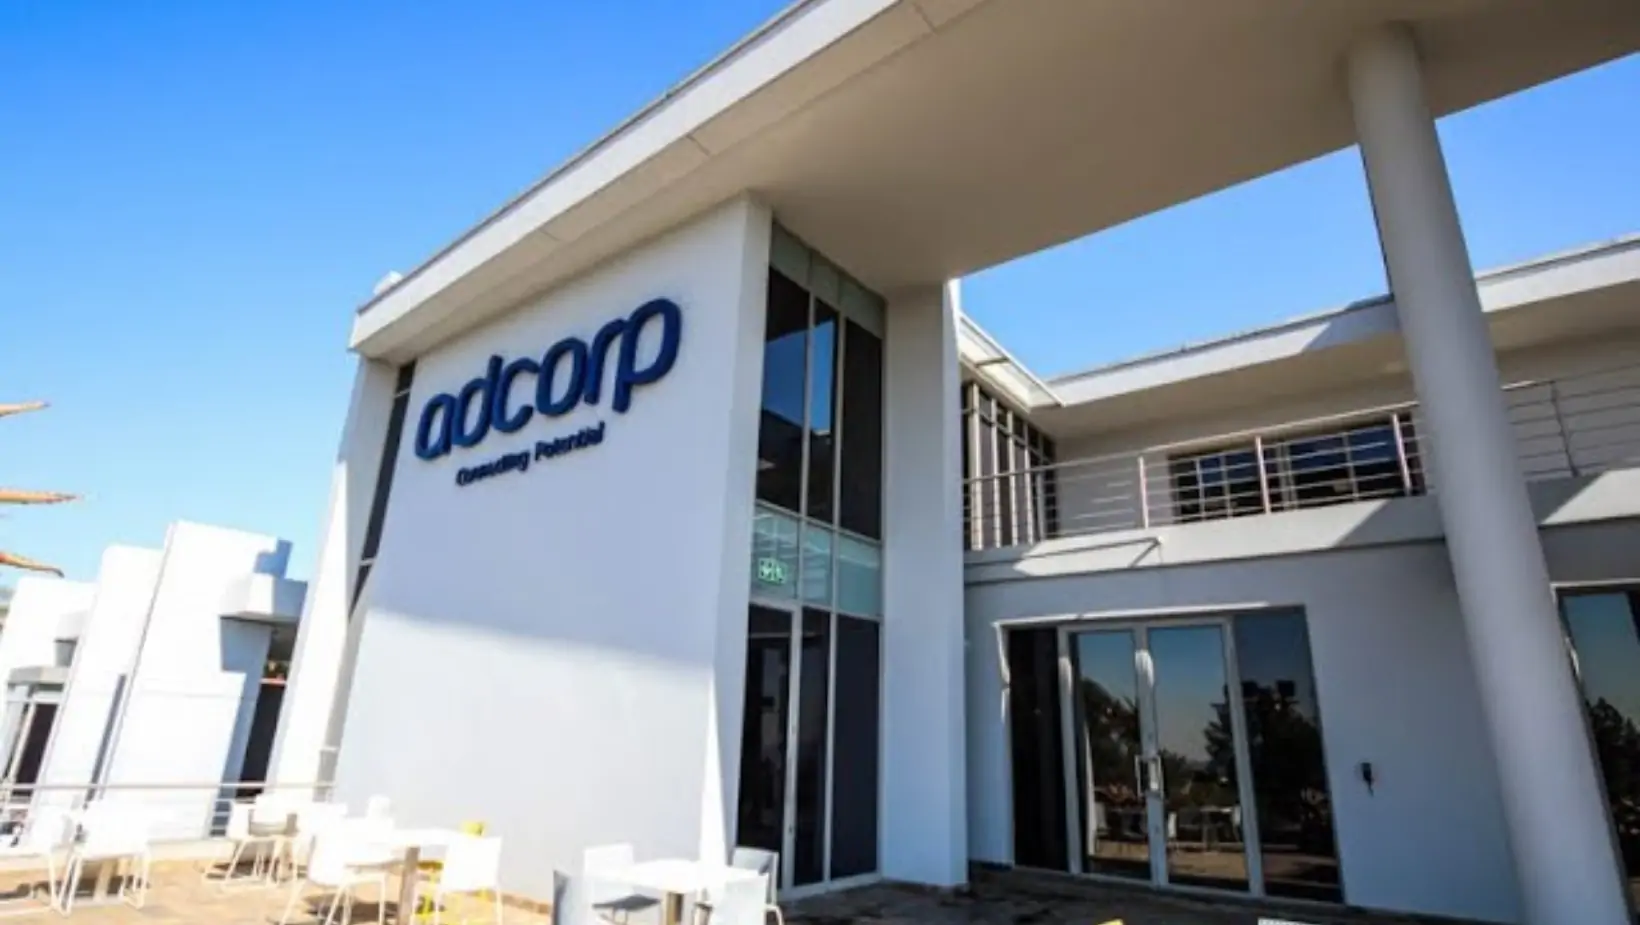 Adcorp Holdings Limited Completes Odd-lot Offer: A Strategic Move in Share Capital Management